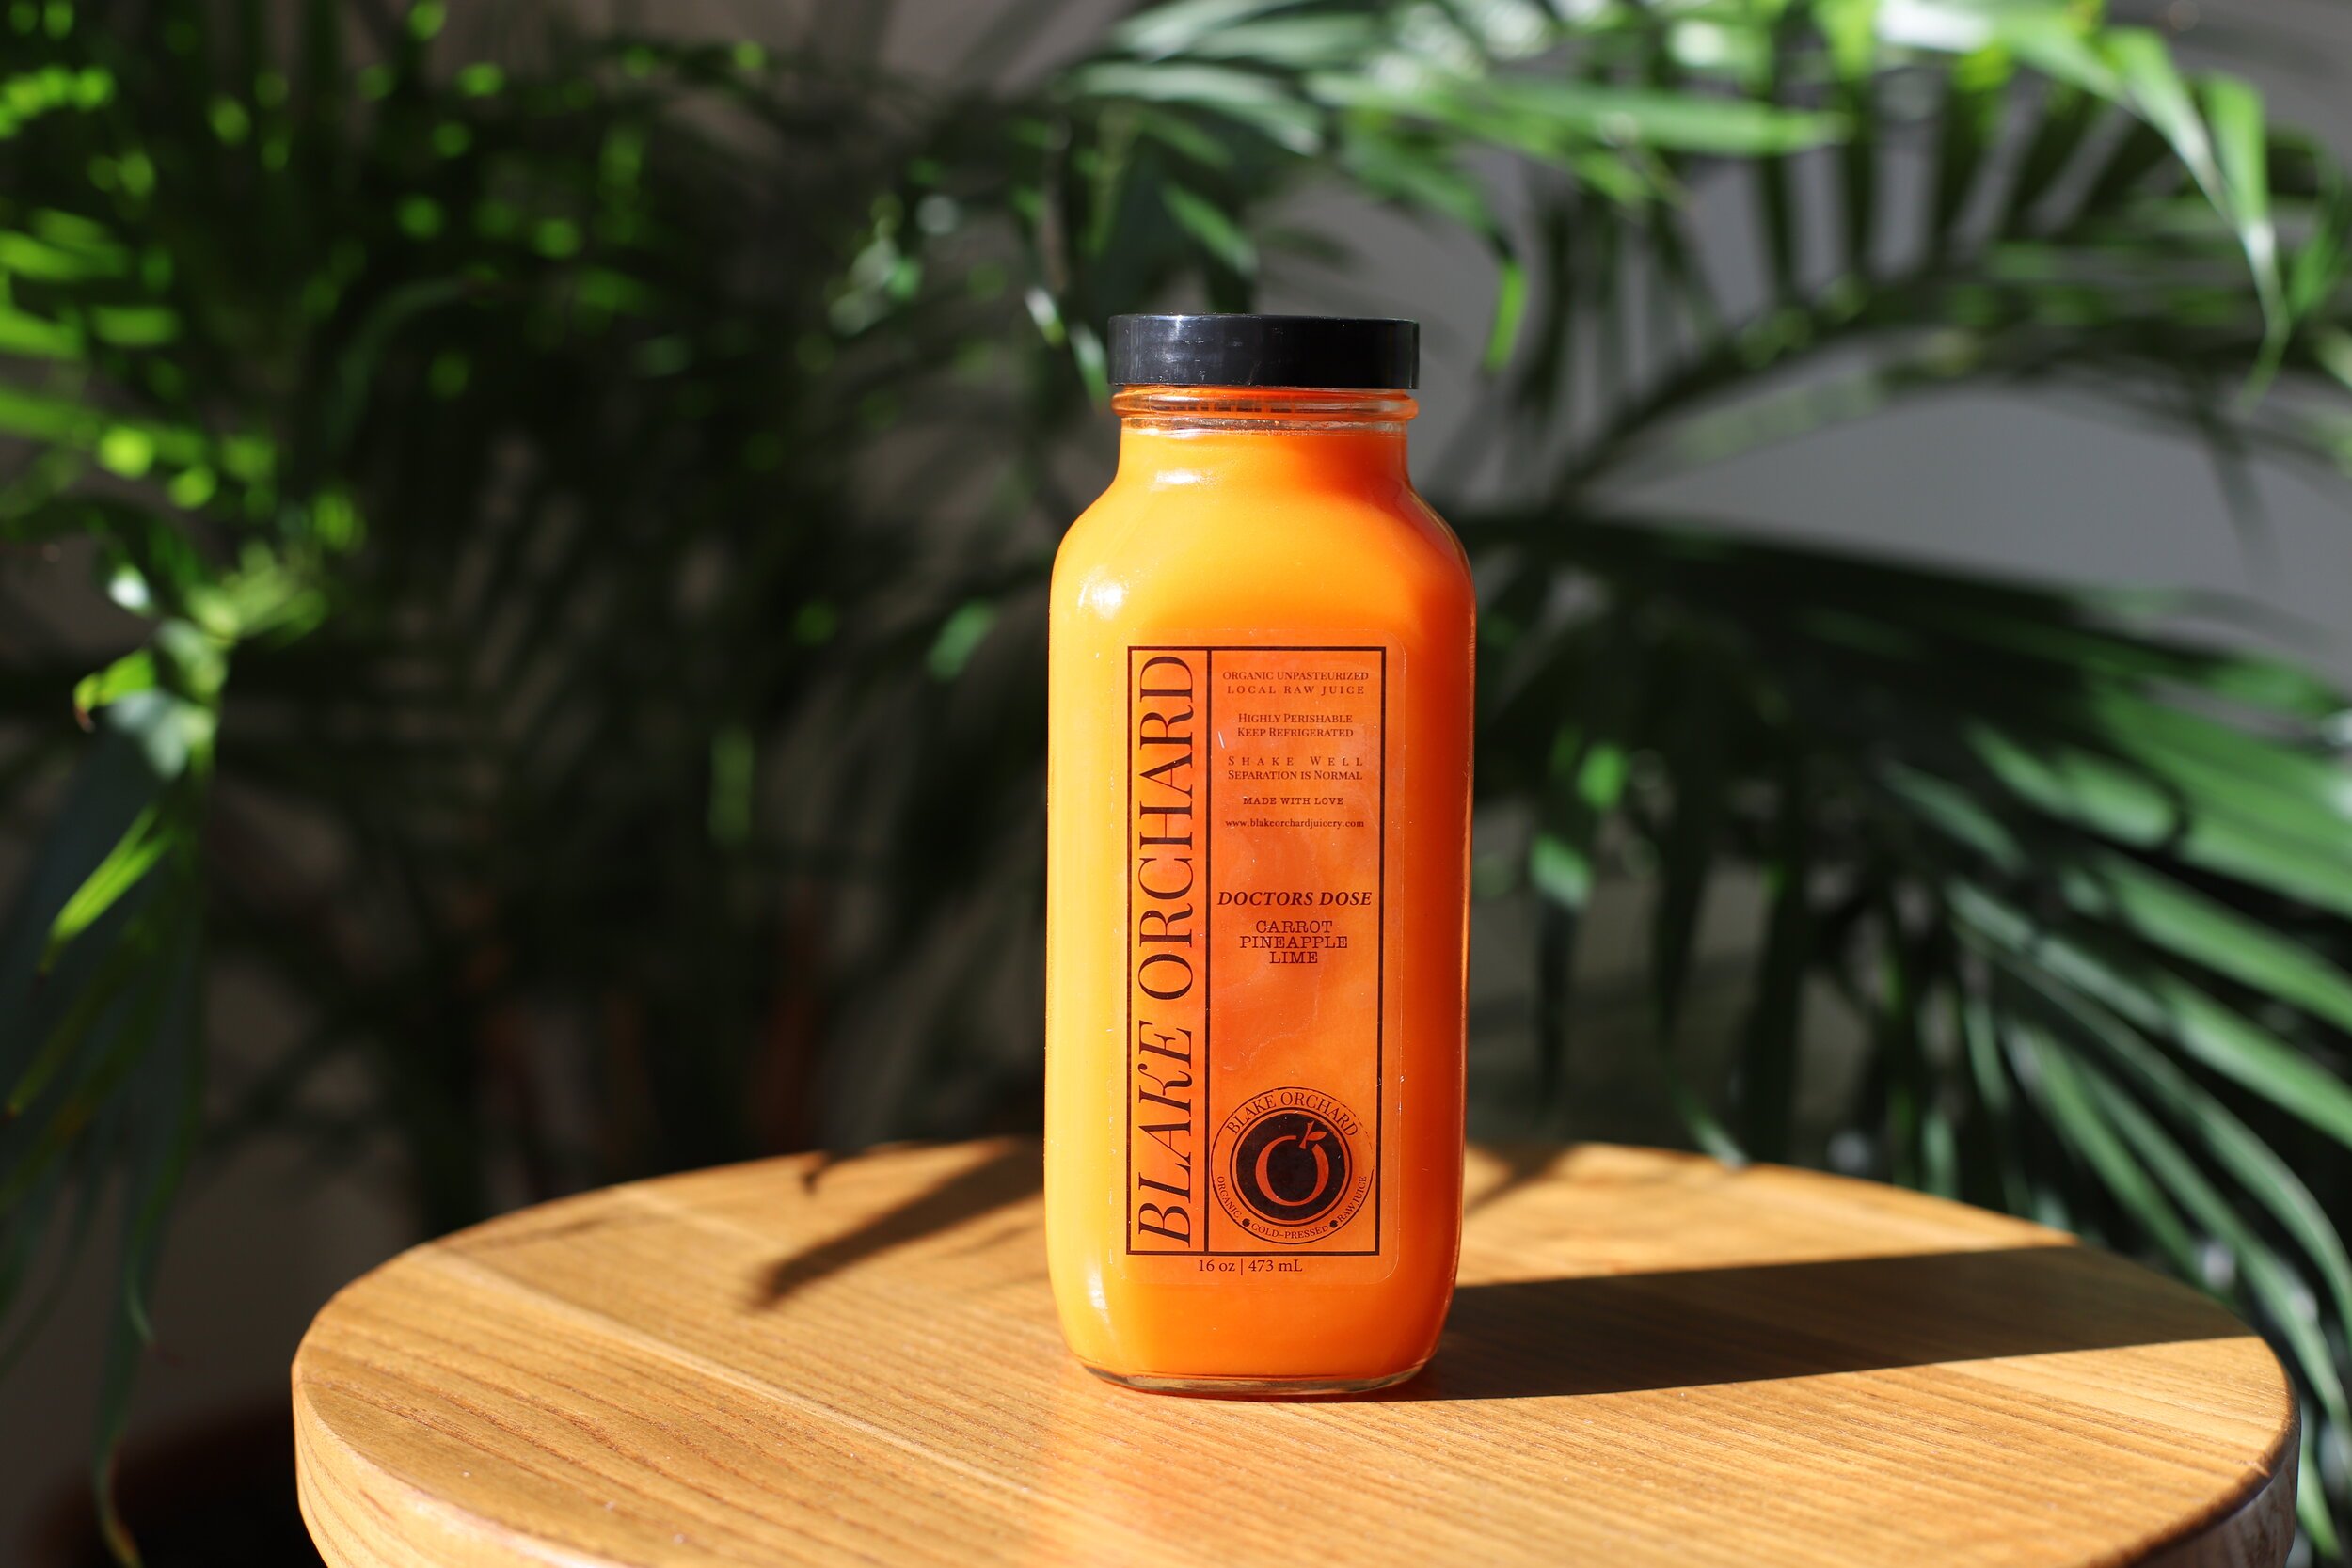 Doctors Dose, one of Blake Orchard Juicery's blends with carrot, pineapple, and lime